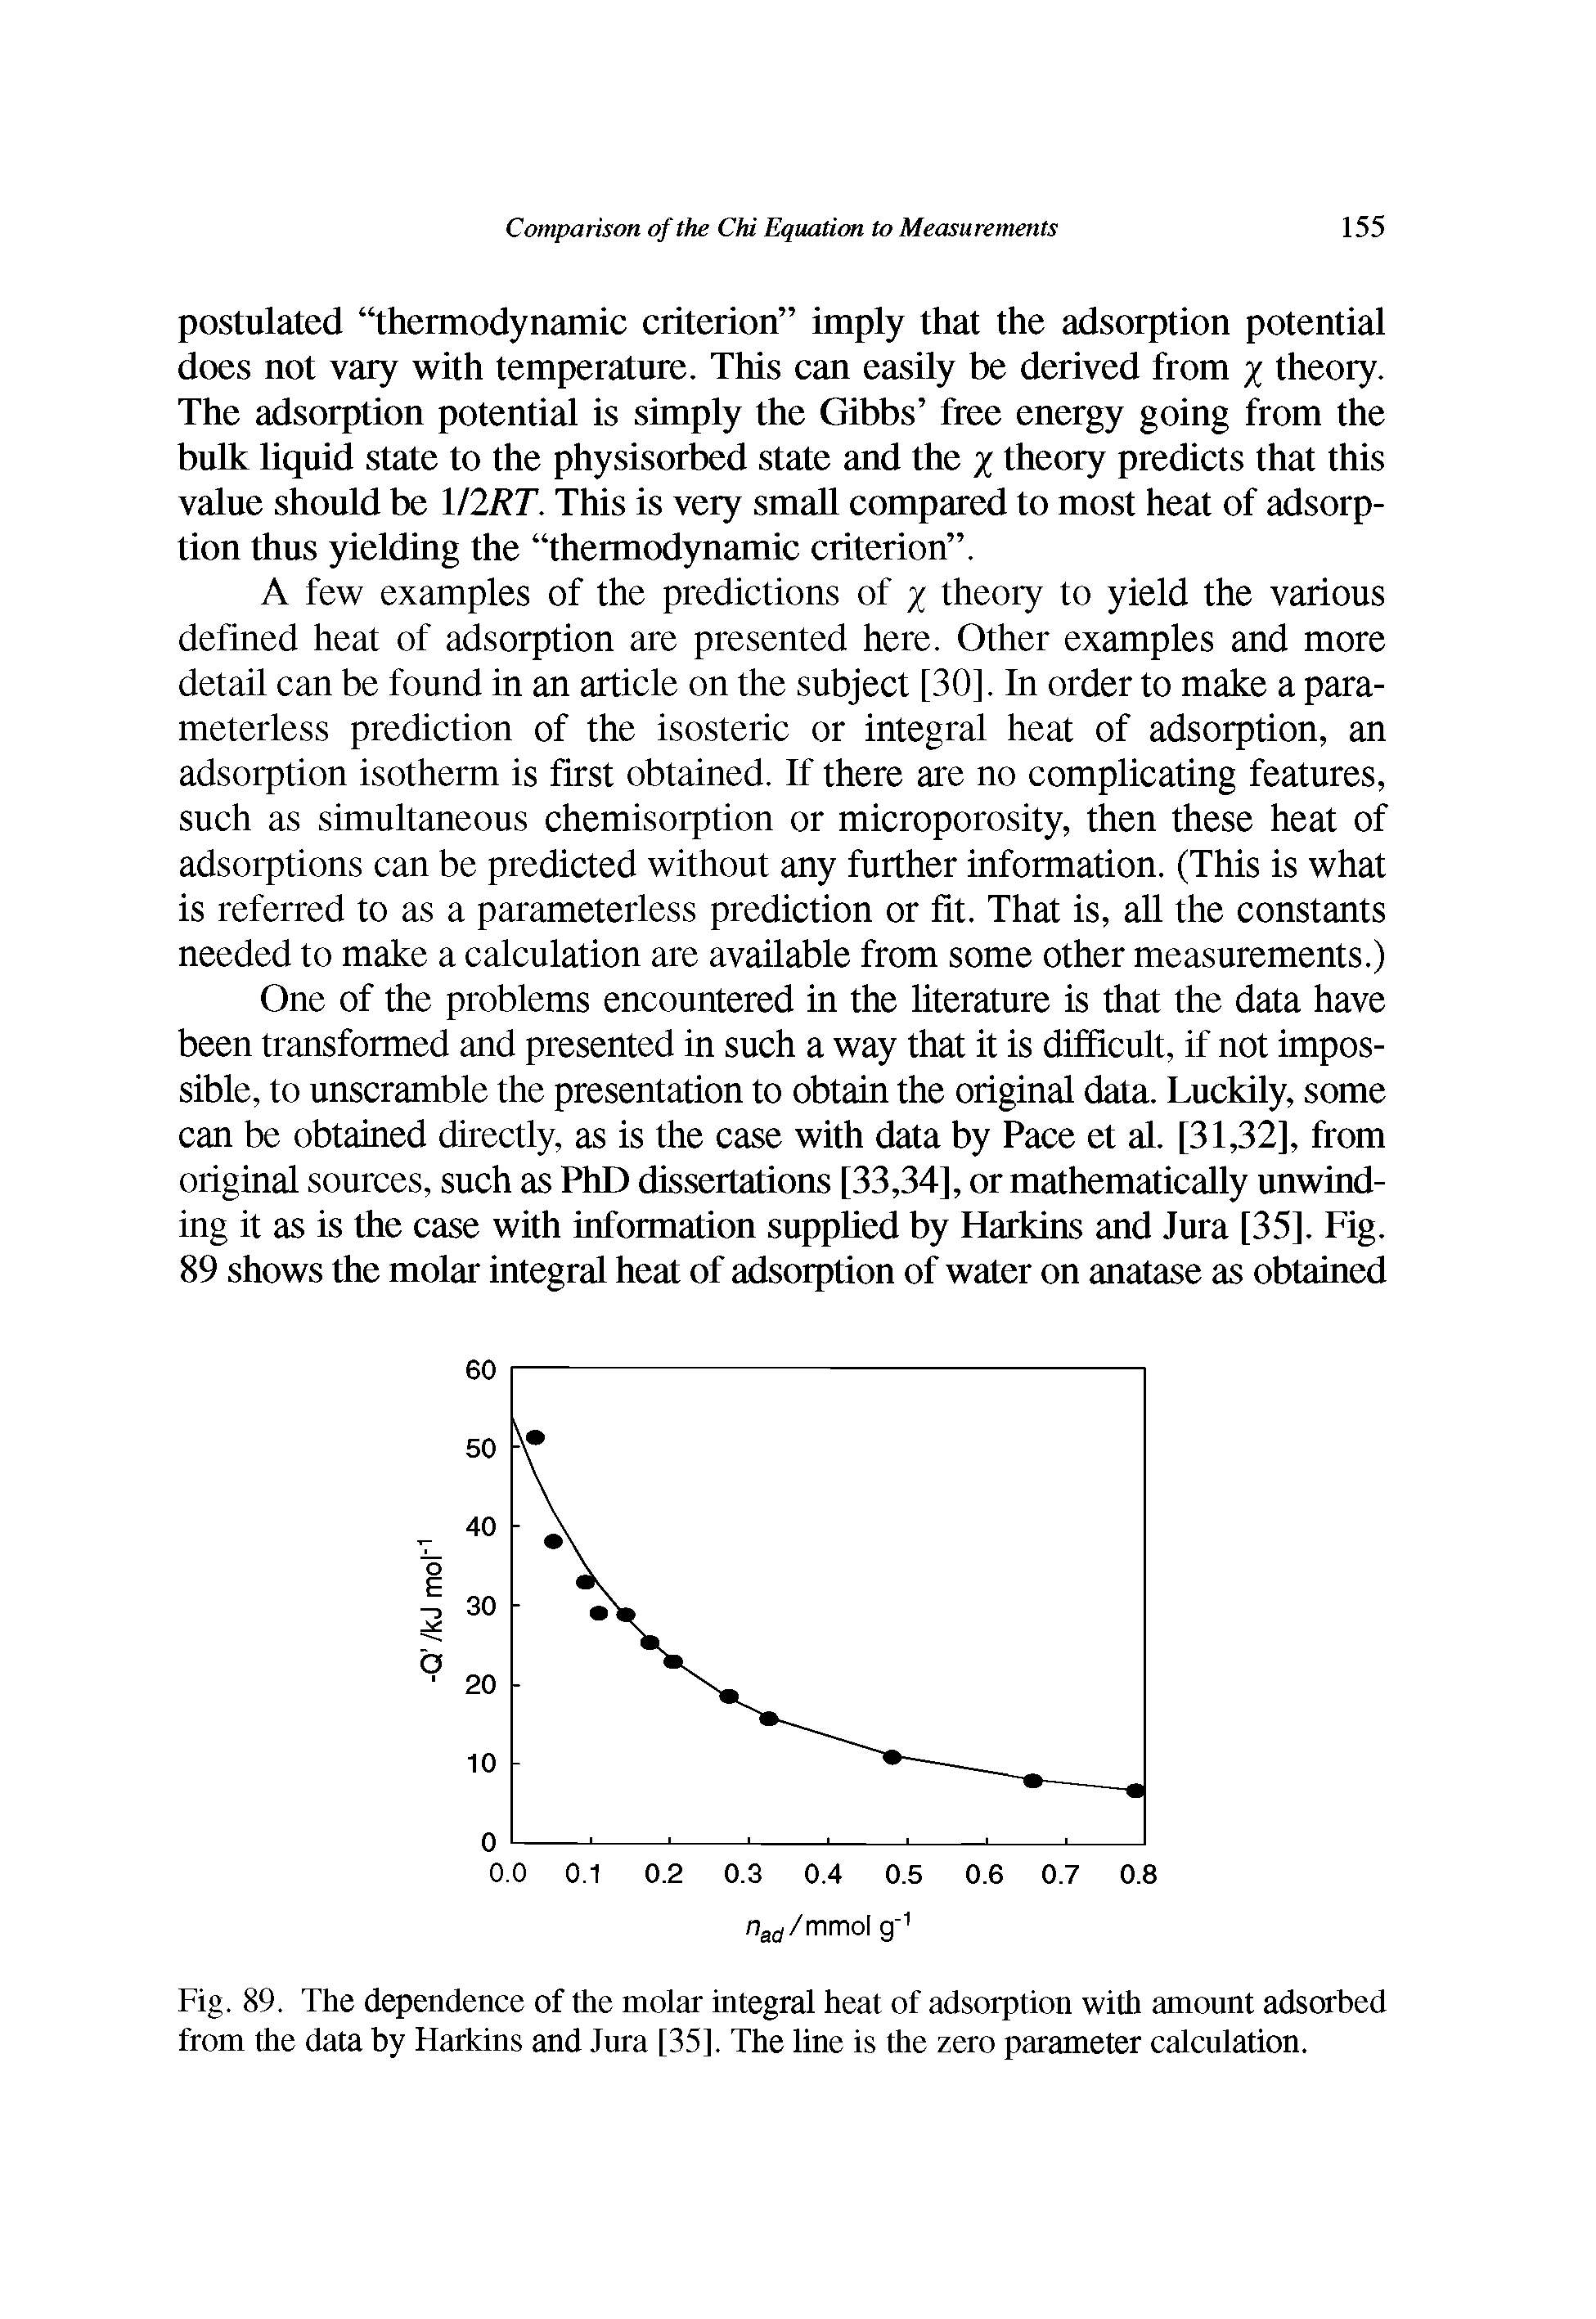 Fig. 89. The dependence of the molar integral heat of adsorption with amonnt adsorbed from the data by Harkins and Jnra [35], The line is the zero parameter calculation.